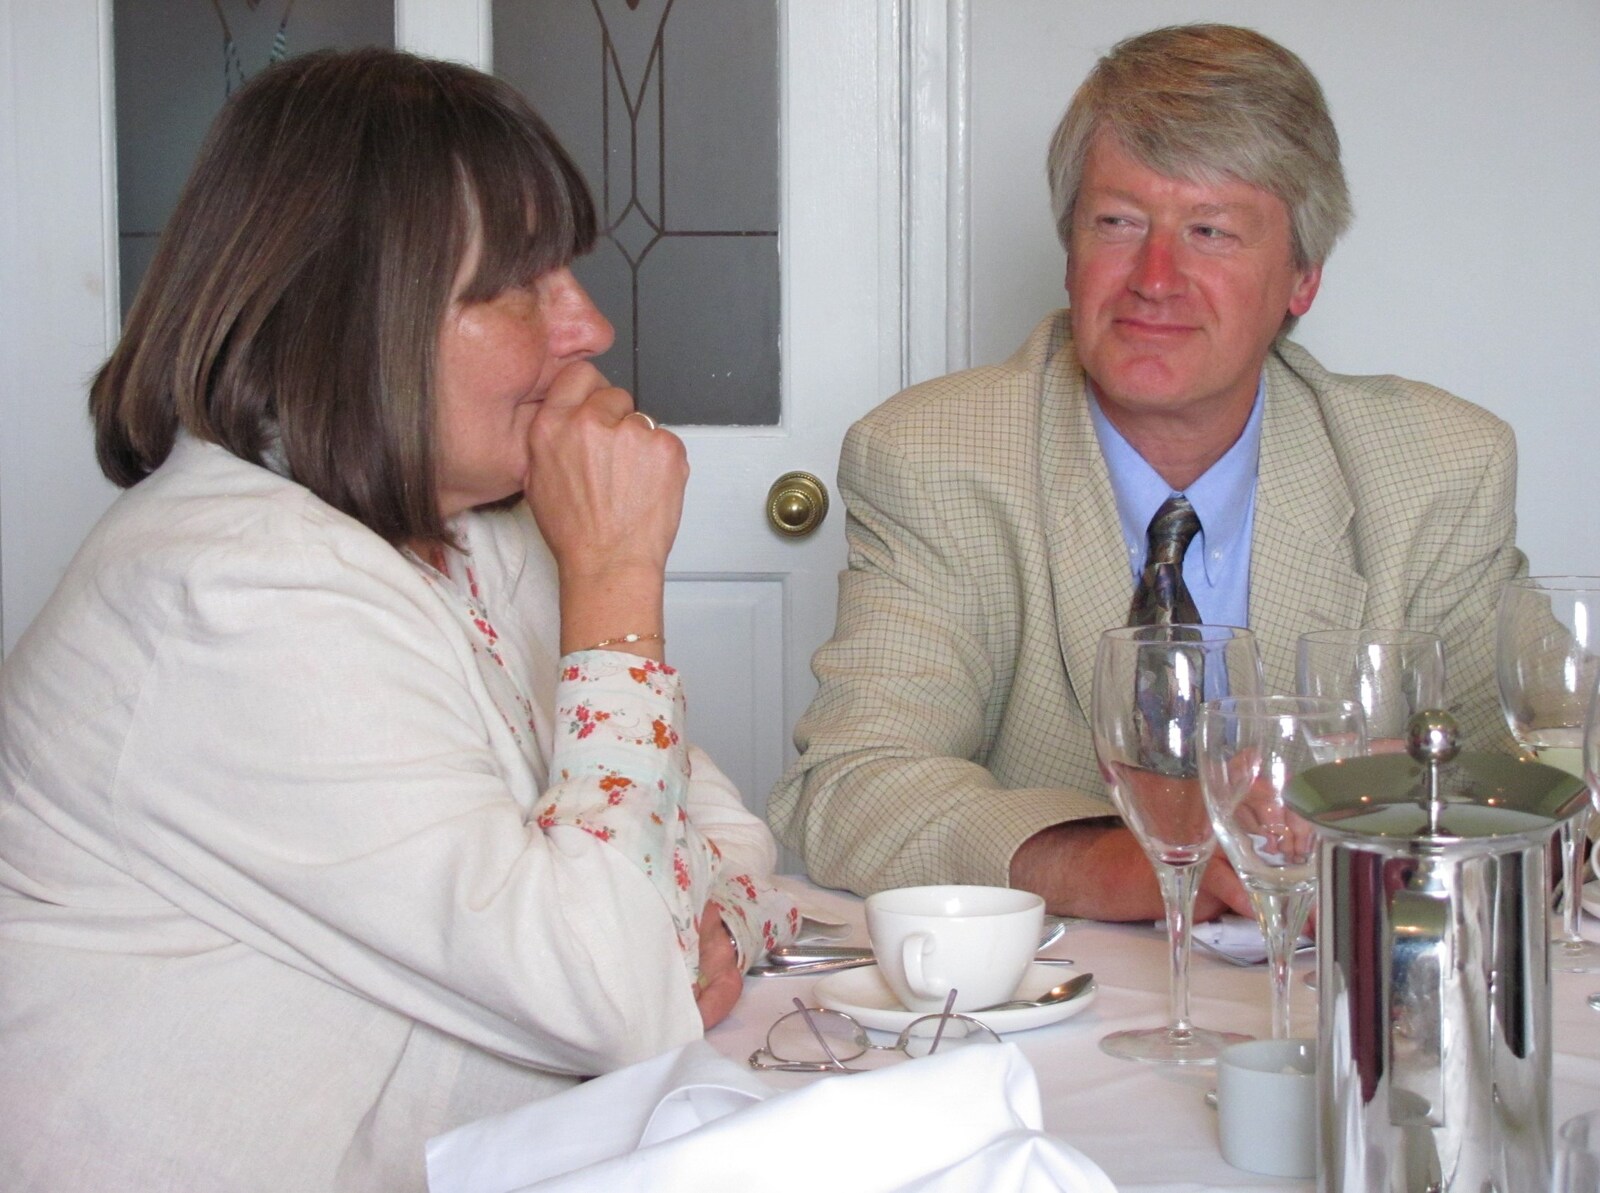 Caroline and Neil from Mike's Memorial, Prince Hall Hotel, Two Bridges, Dartmoor - 12th July 2011